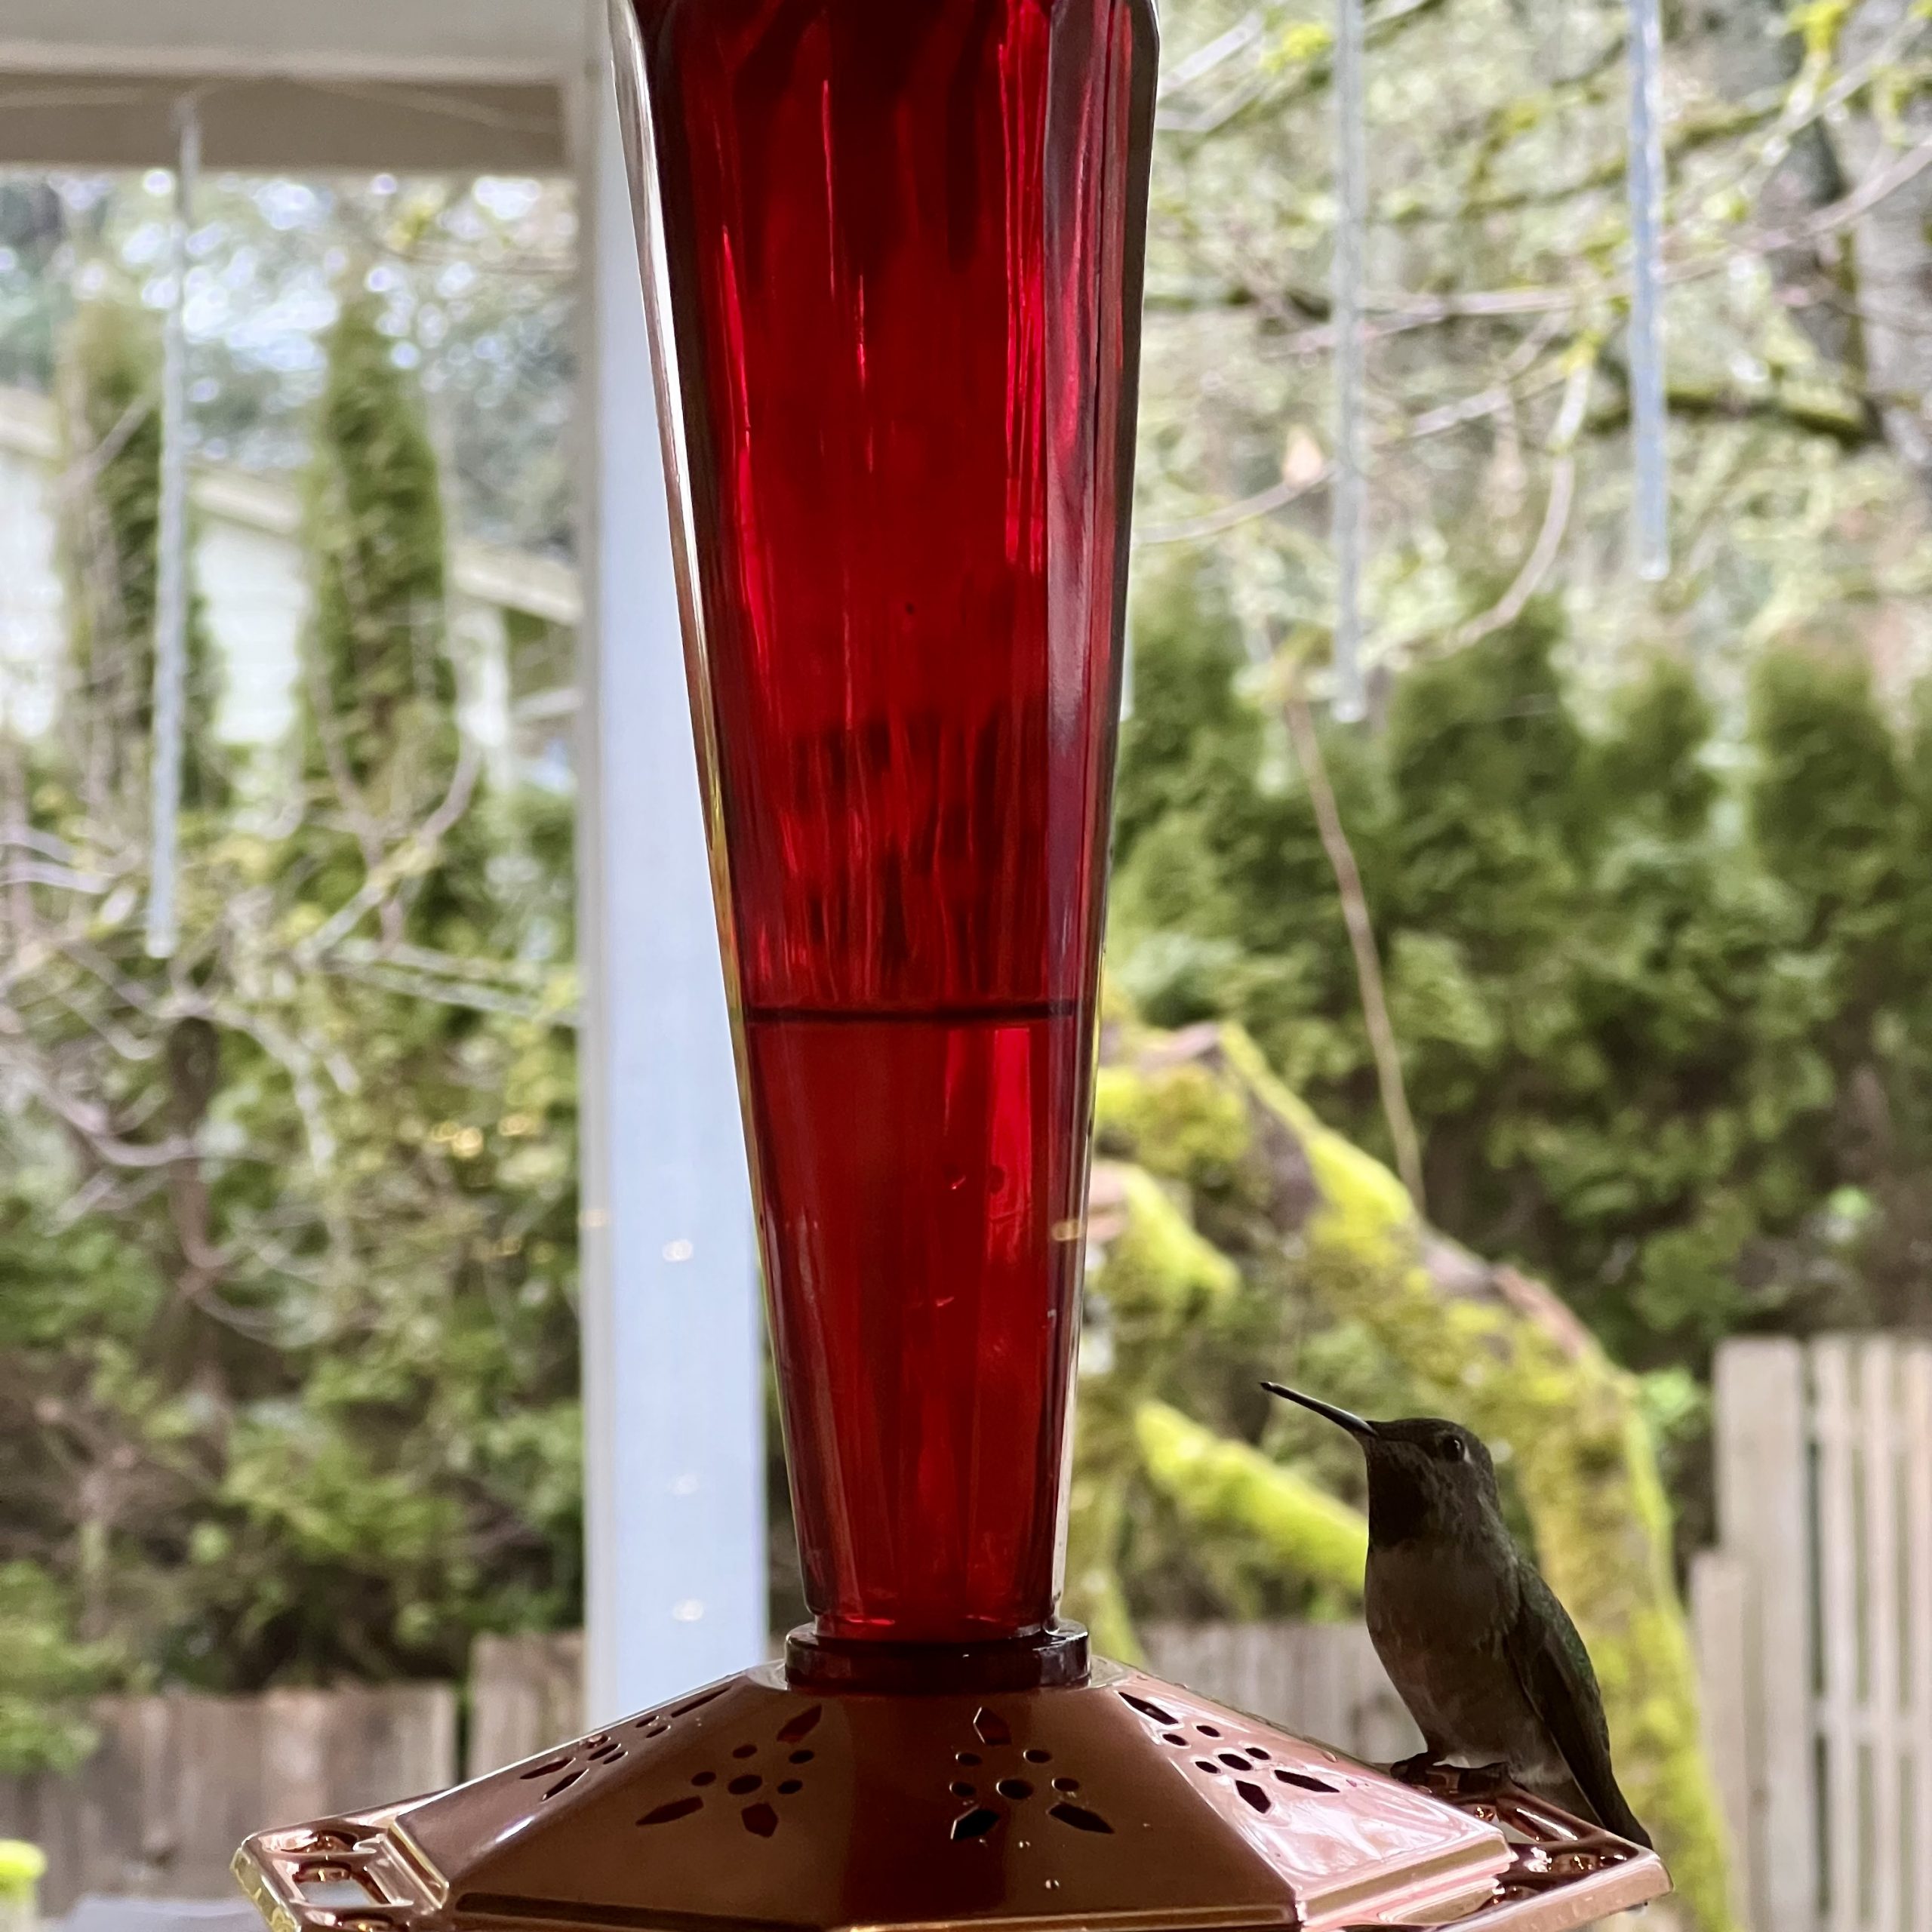 Hummingbird perched on bronze and red feeder.